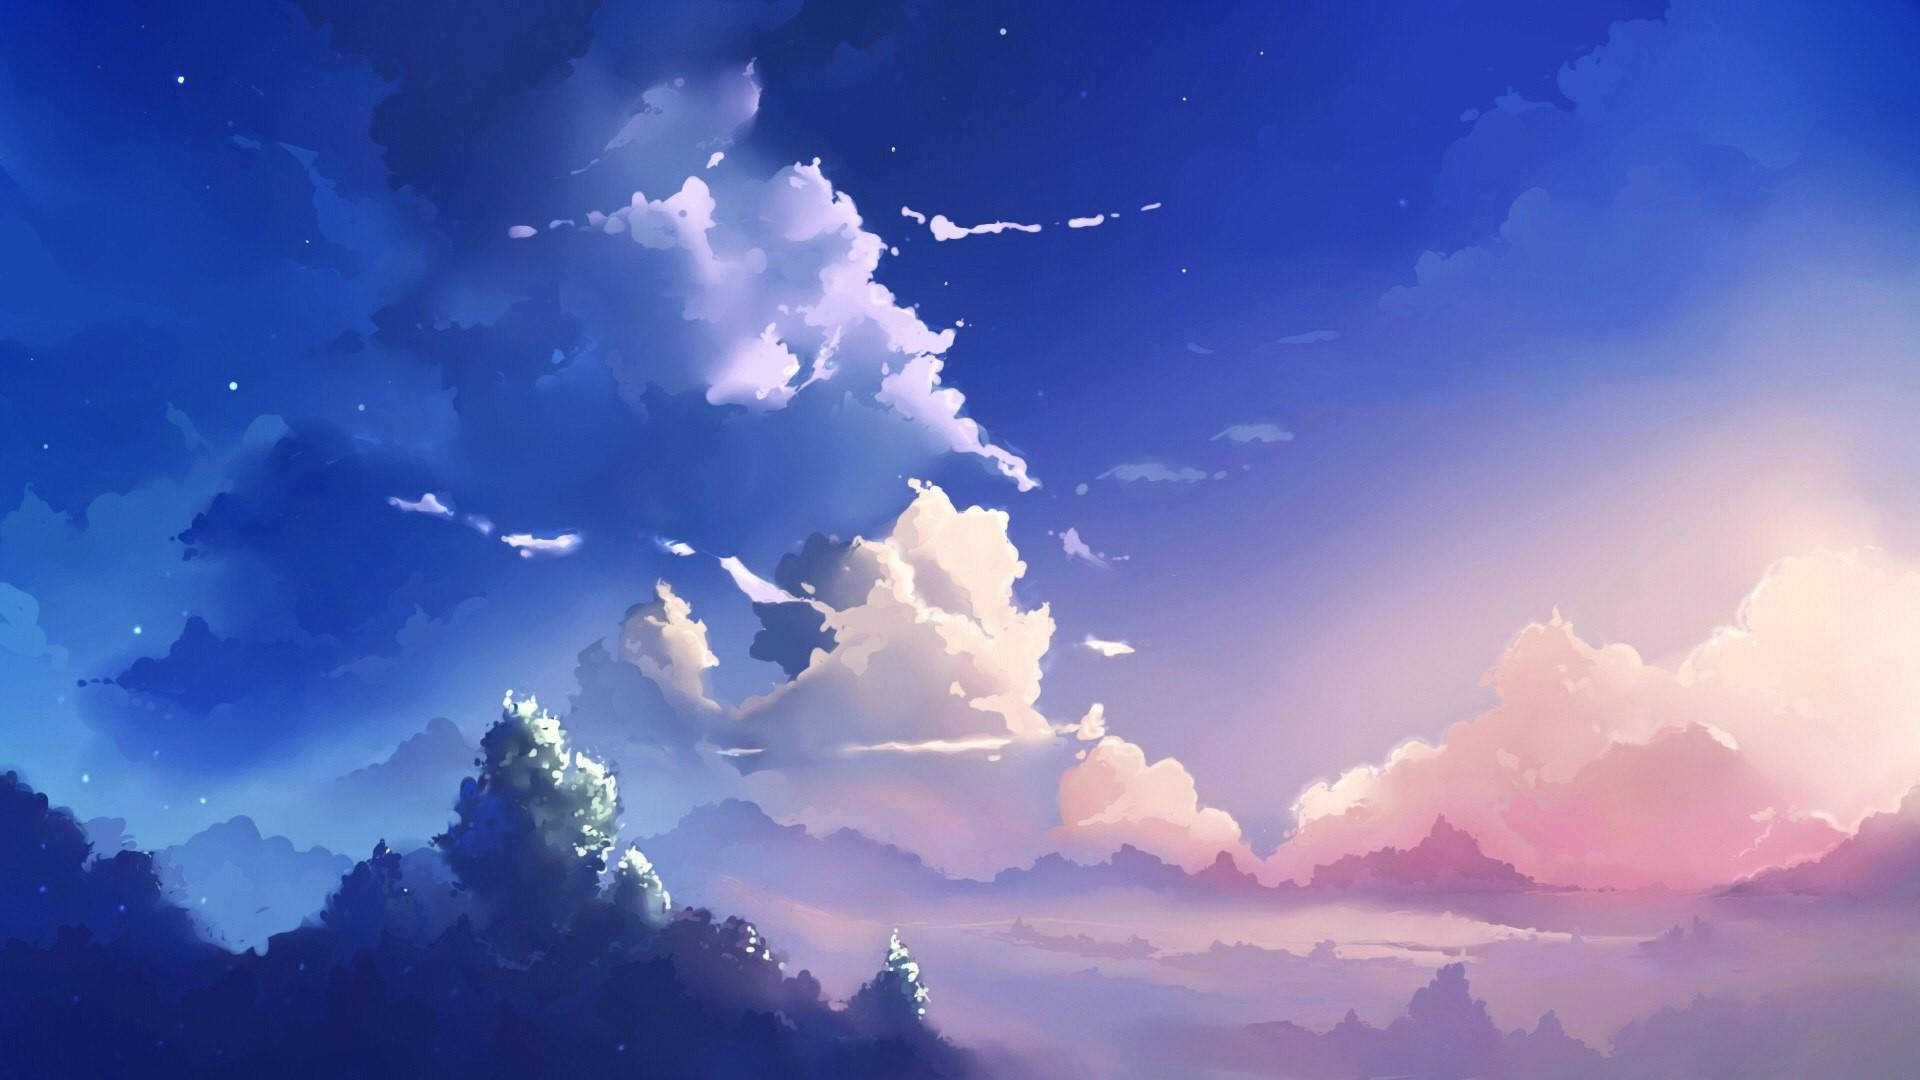 “Experience the Serene Blue Anime Scenery.” Wallpaper